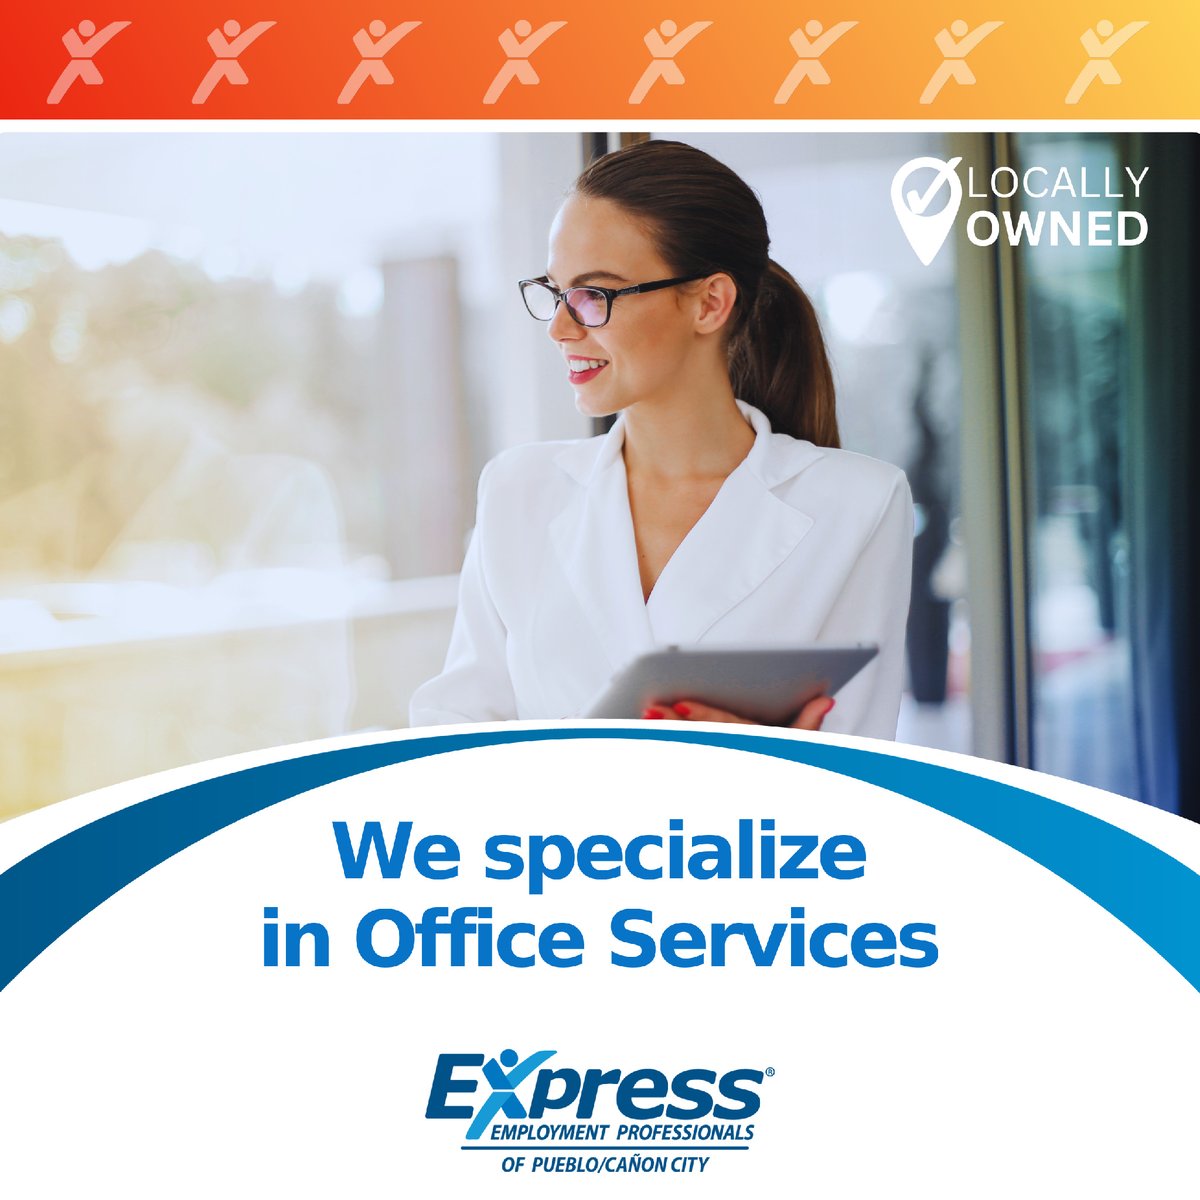 #Employer Update: Our employment specialist are certified in hiring and recruiting for administrative candidates.
(719)545-9120

#ExpressPros #ColoradoBusiness #BusinessConsultant